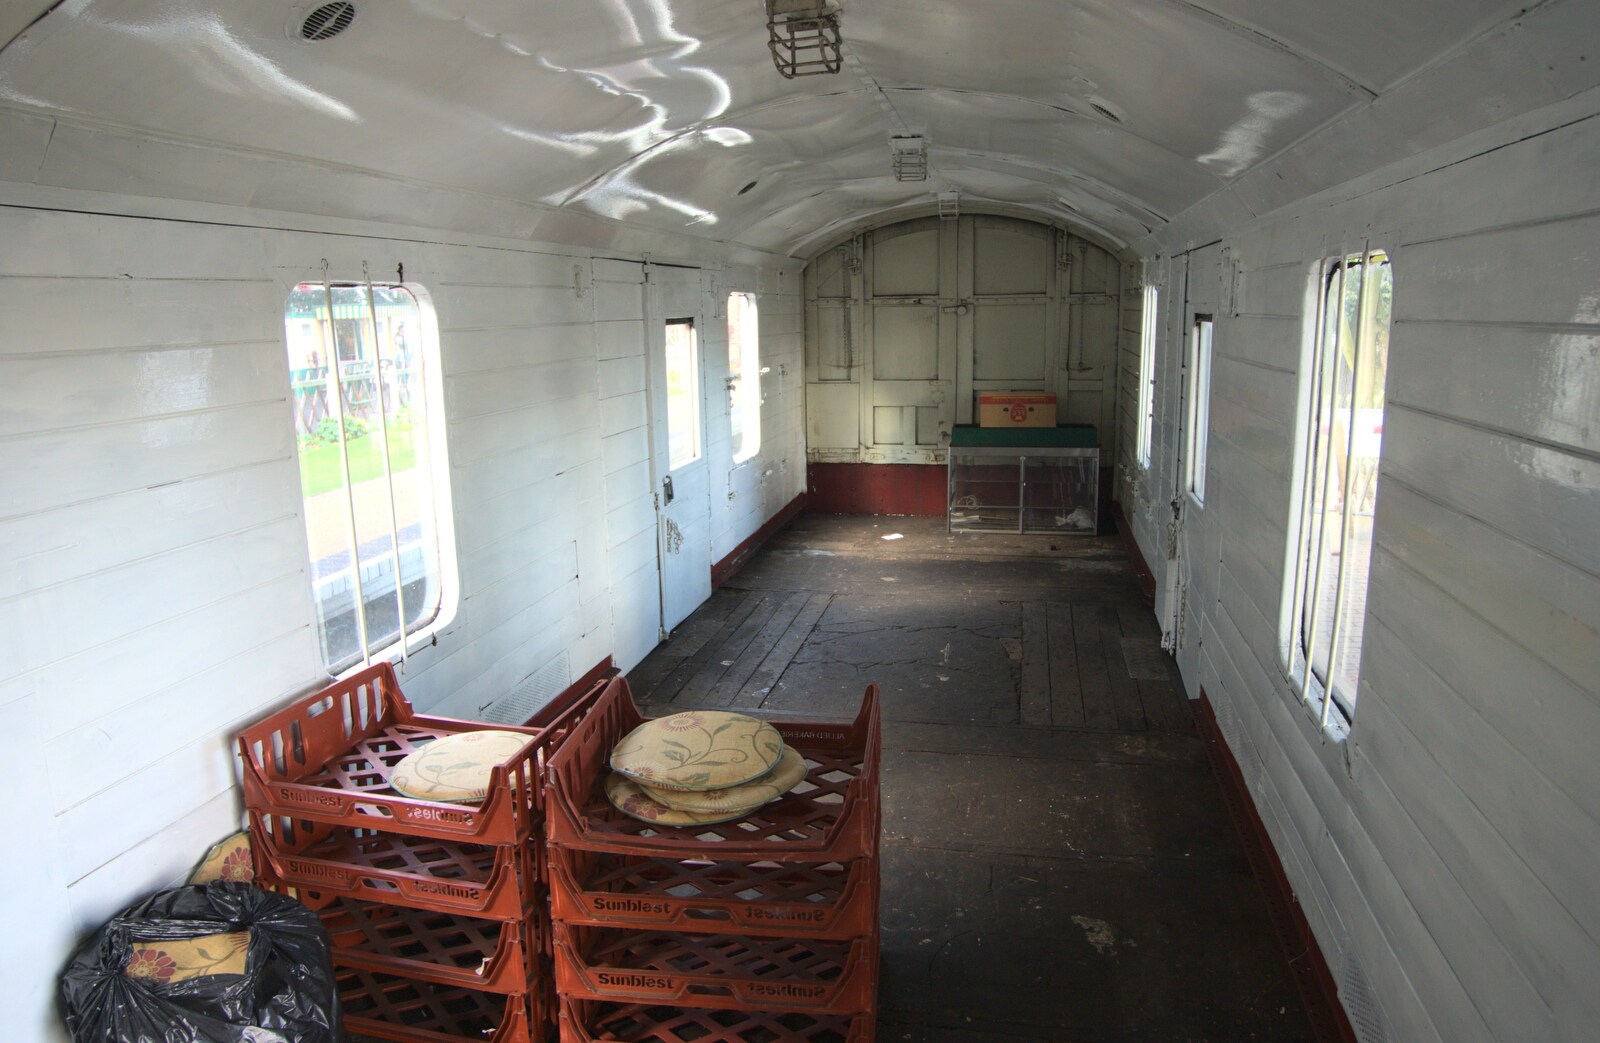 An old-skool Guards Van in a Mark 1 coach from The 1940s Steam Train Weekend, Holt, Norfolk - 18th September 2011